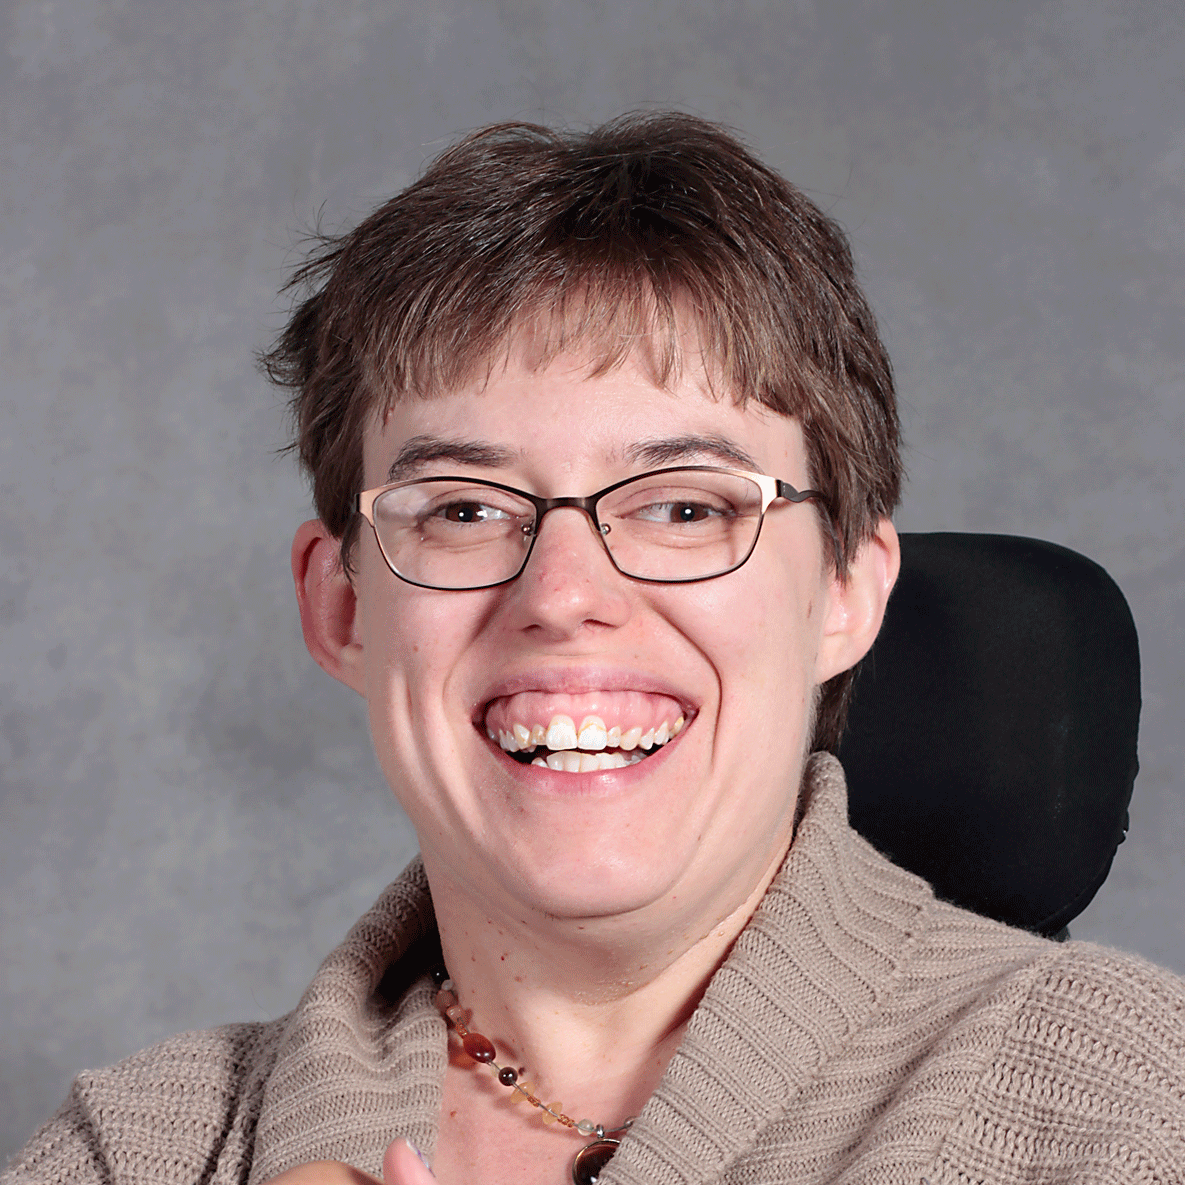 Smiling person with short brown hair and bangs wearing glasses and a tan sweater